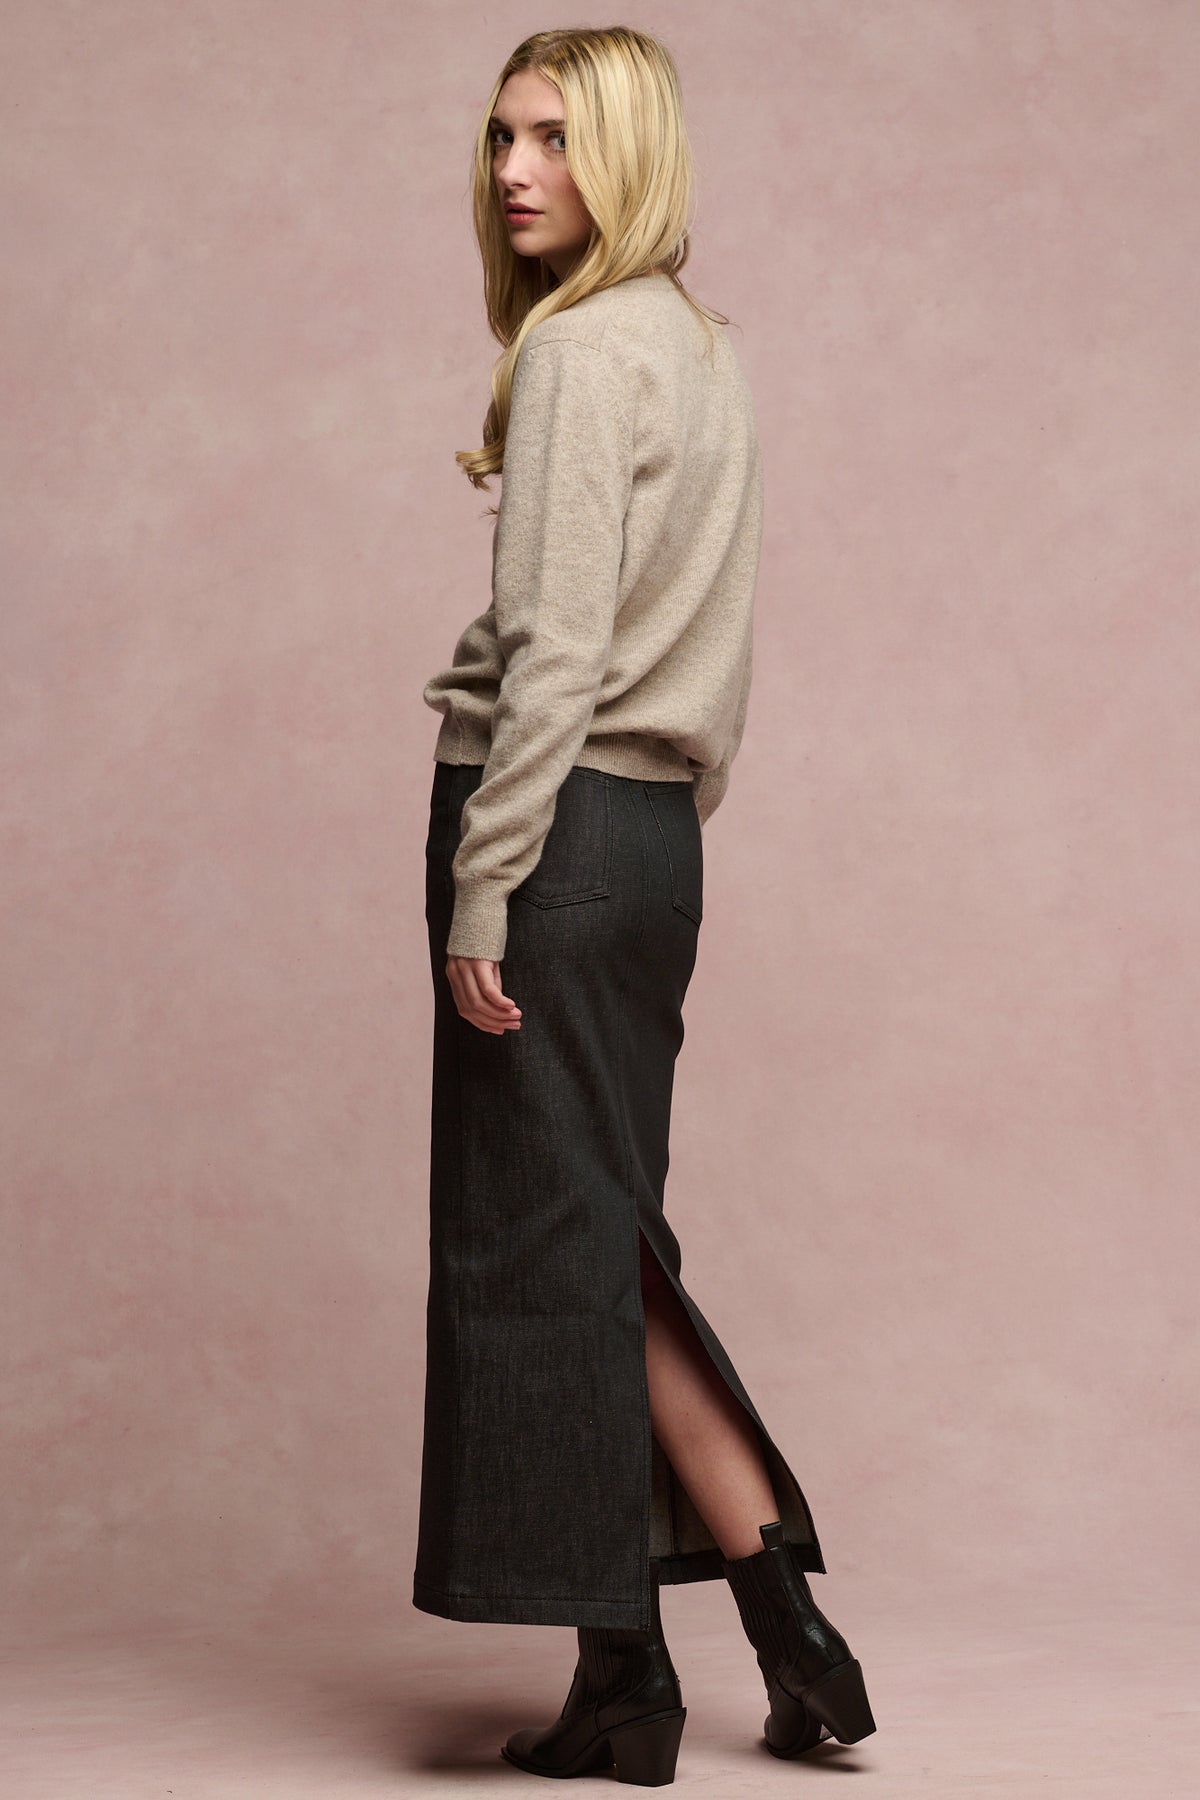 
            Image of the back of blonde female wearing lambswool jumper paired with Frankie denim maxi skirt with split hem and black boots